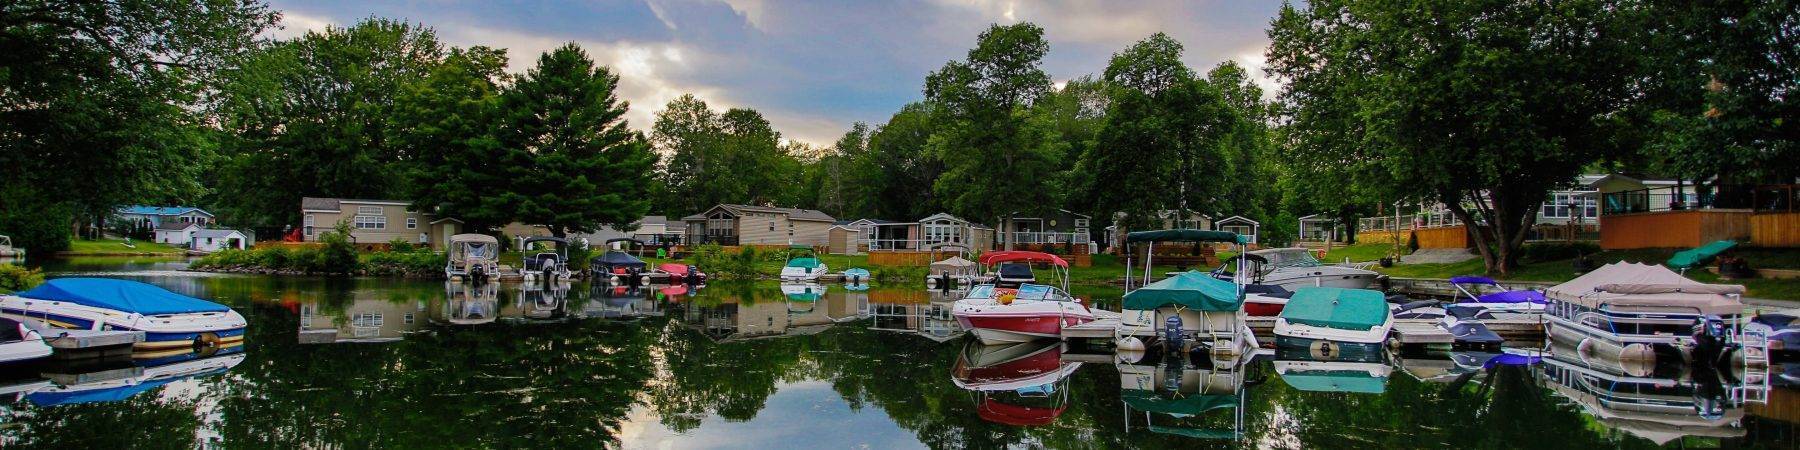 Waterfront Recreational Family Cottages for Sale in Muskoka